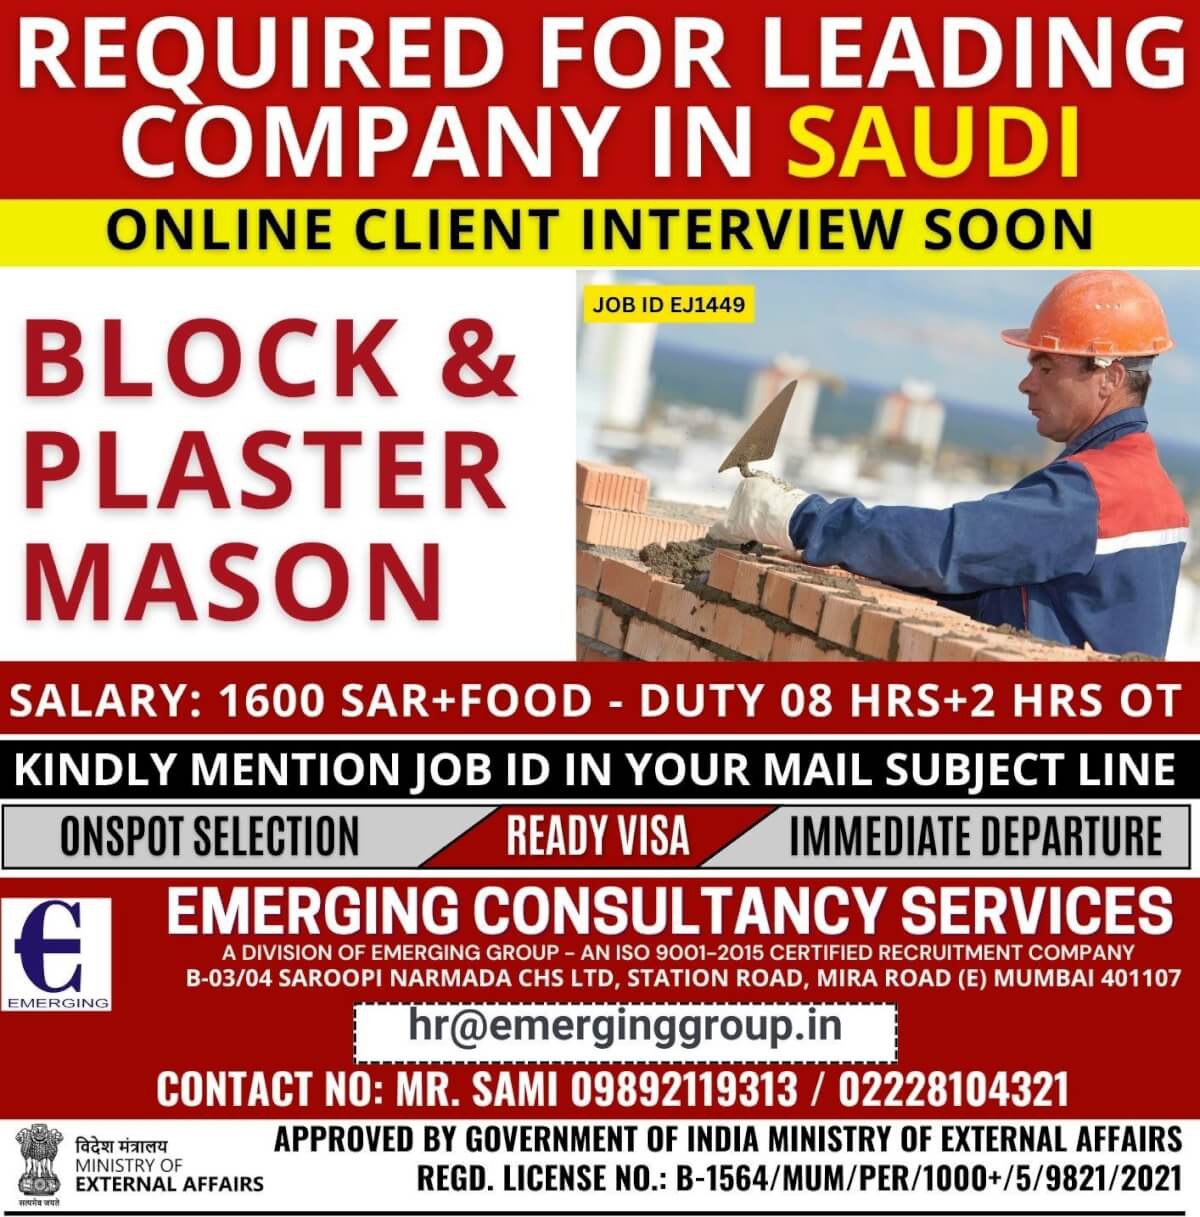 URGENTLY REQUIRED LEADING COMPANY IN SAUDI ARABIA - INTERVIEW SOON